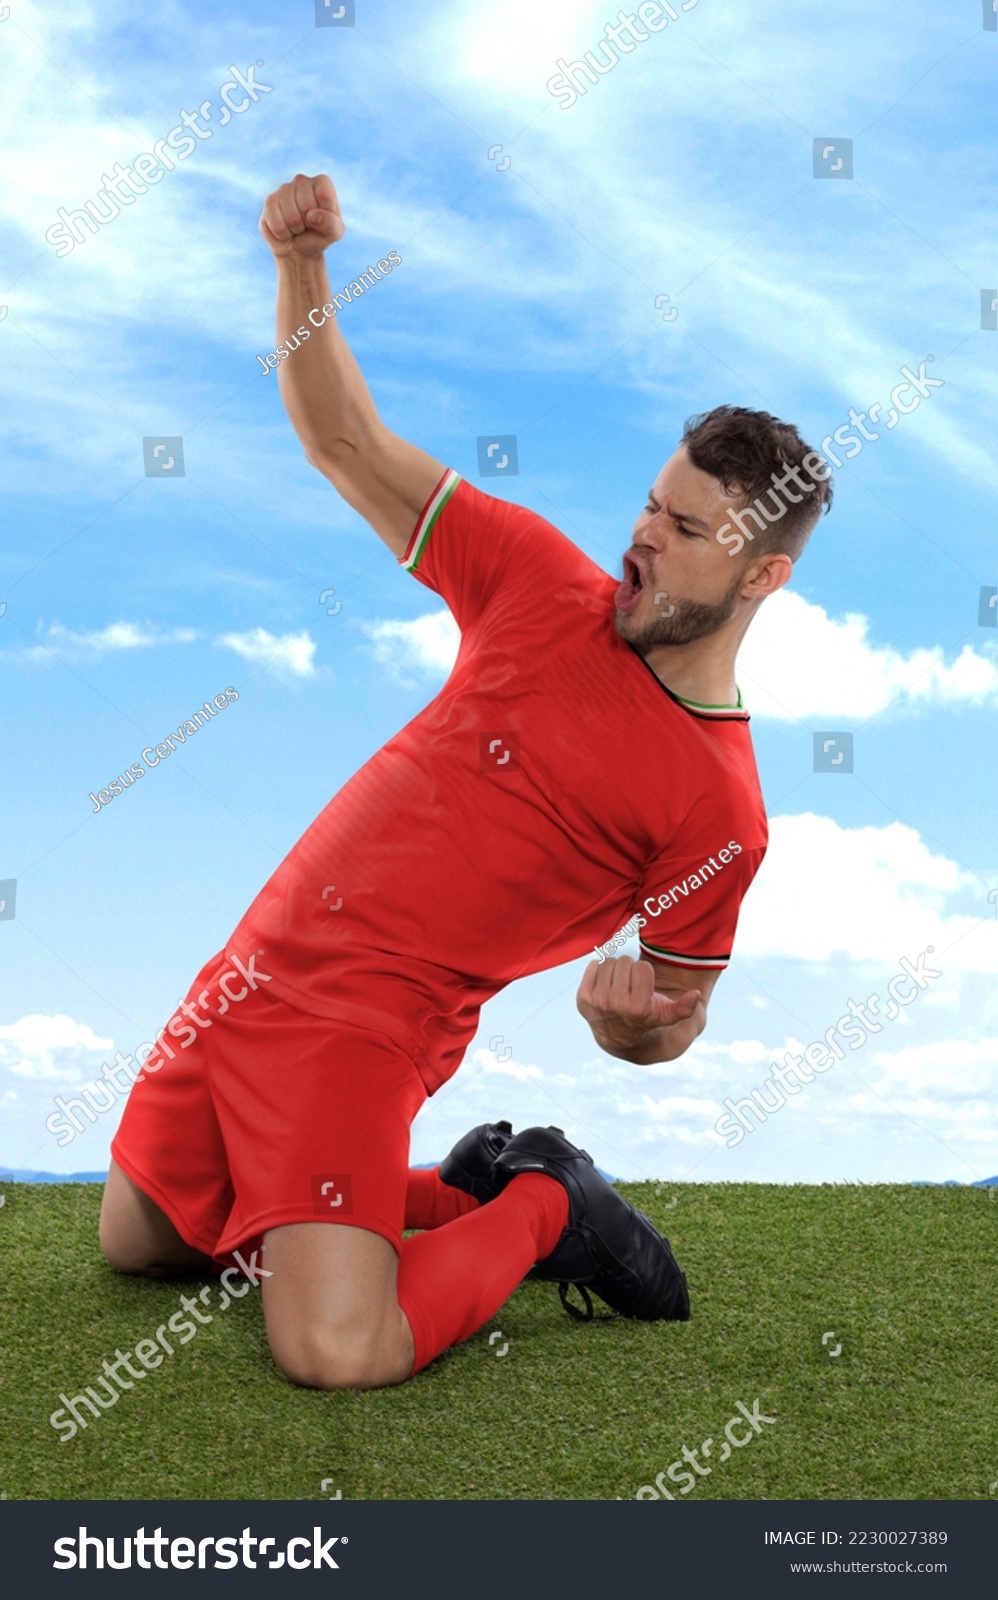 Professional soccer player with a red IR IRAN national team jersey shouting with excitement for scoring a goal with an expression of challenge and happiness on field grass and cloud background #2230027389